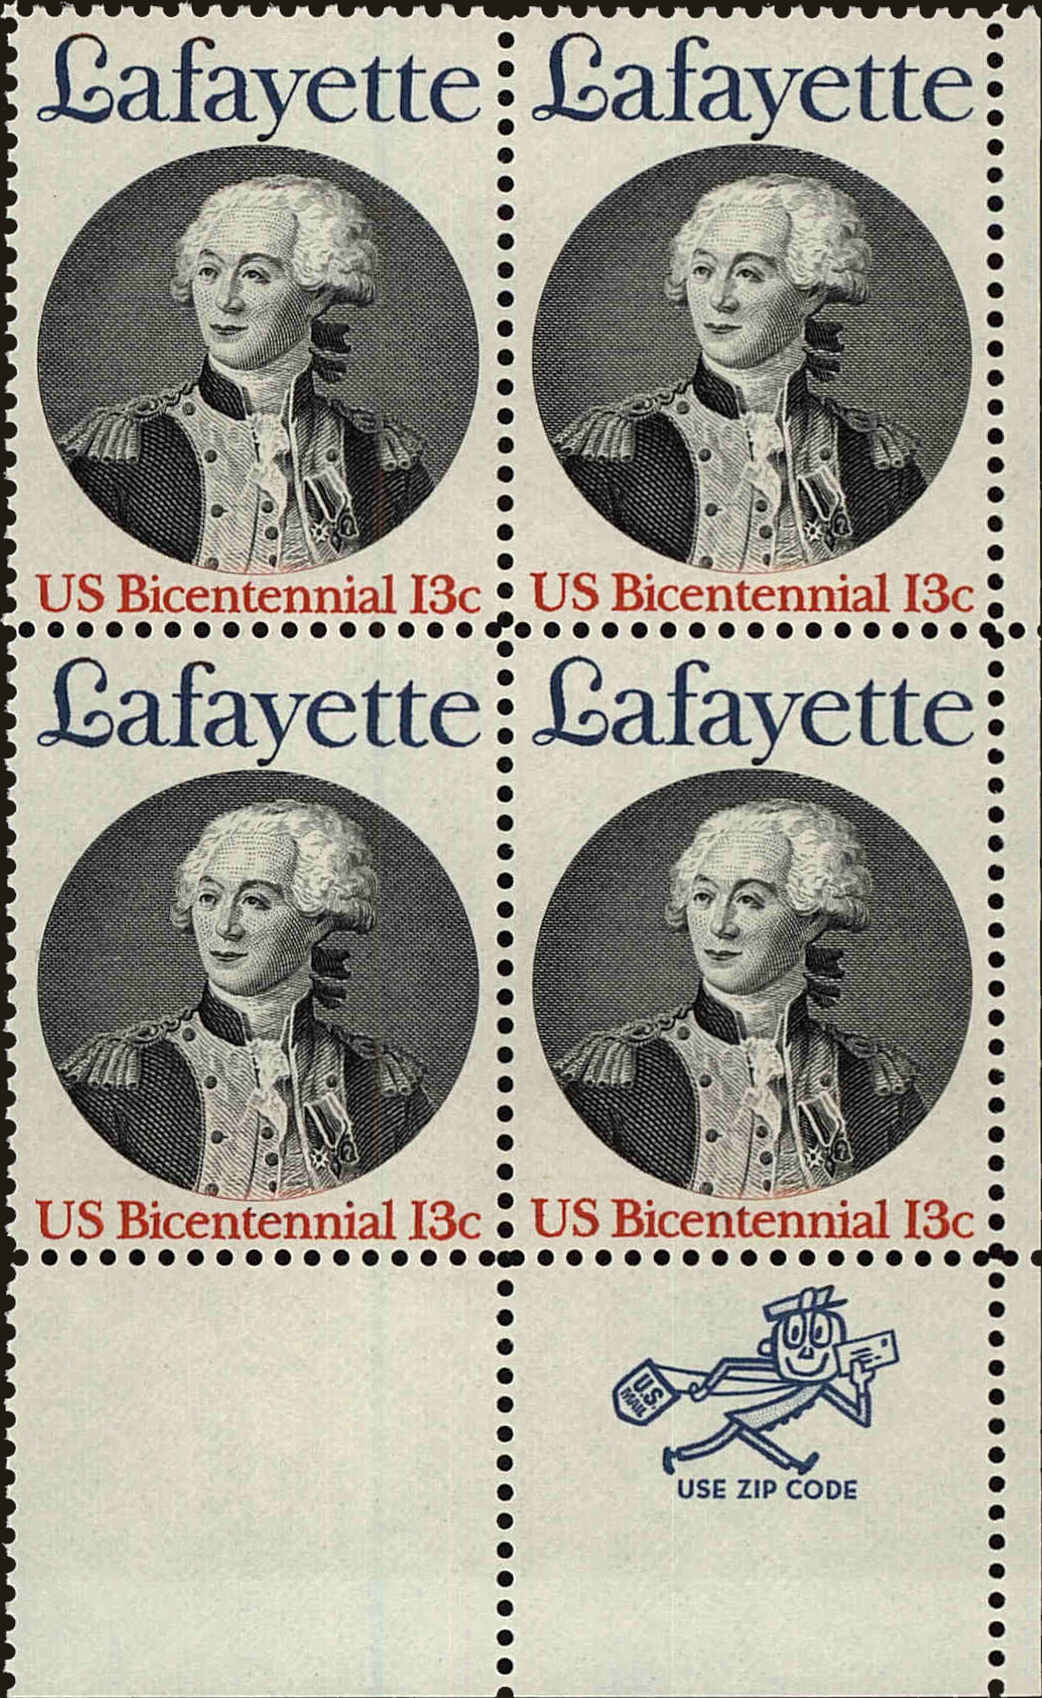 Front view of United States 1716 collectors stamp